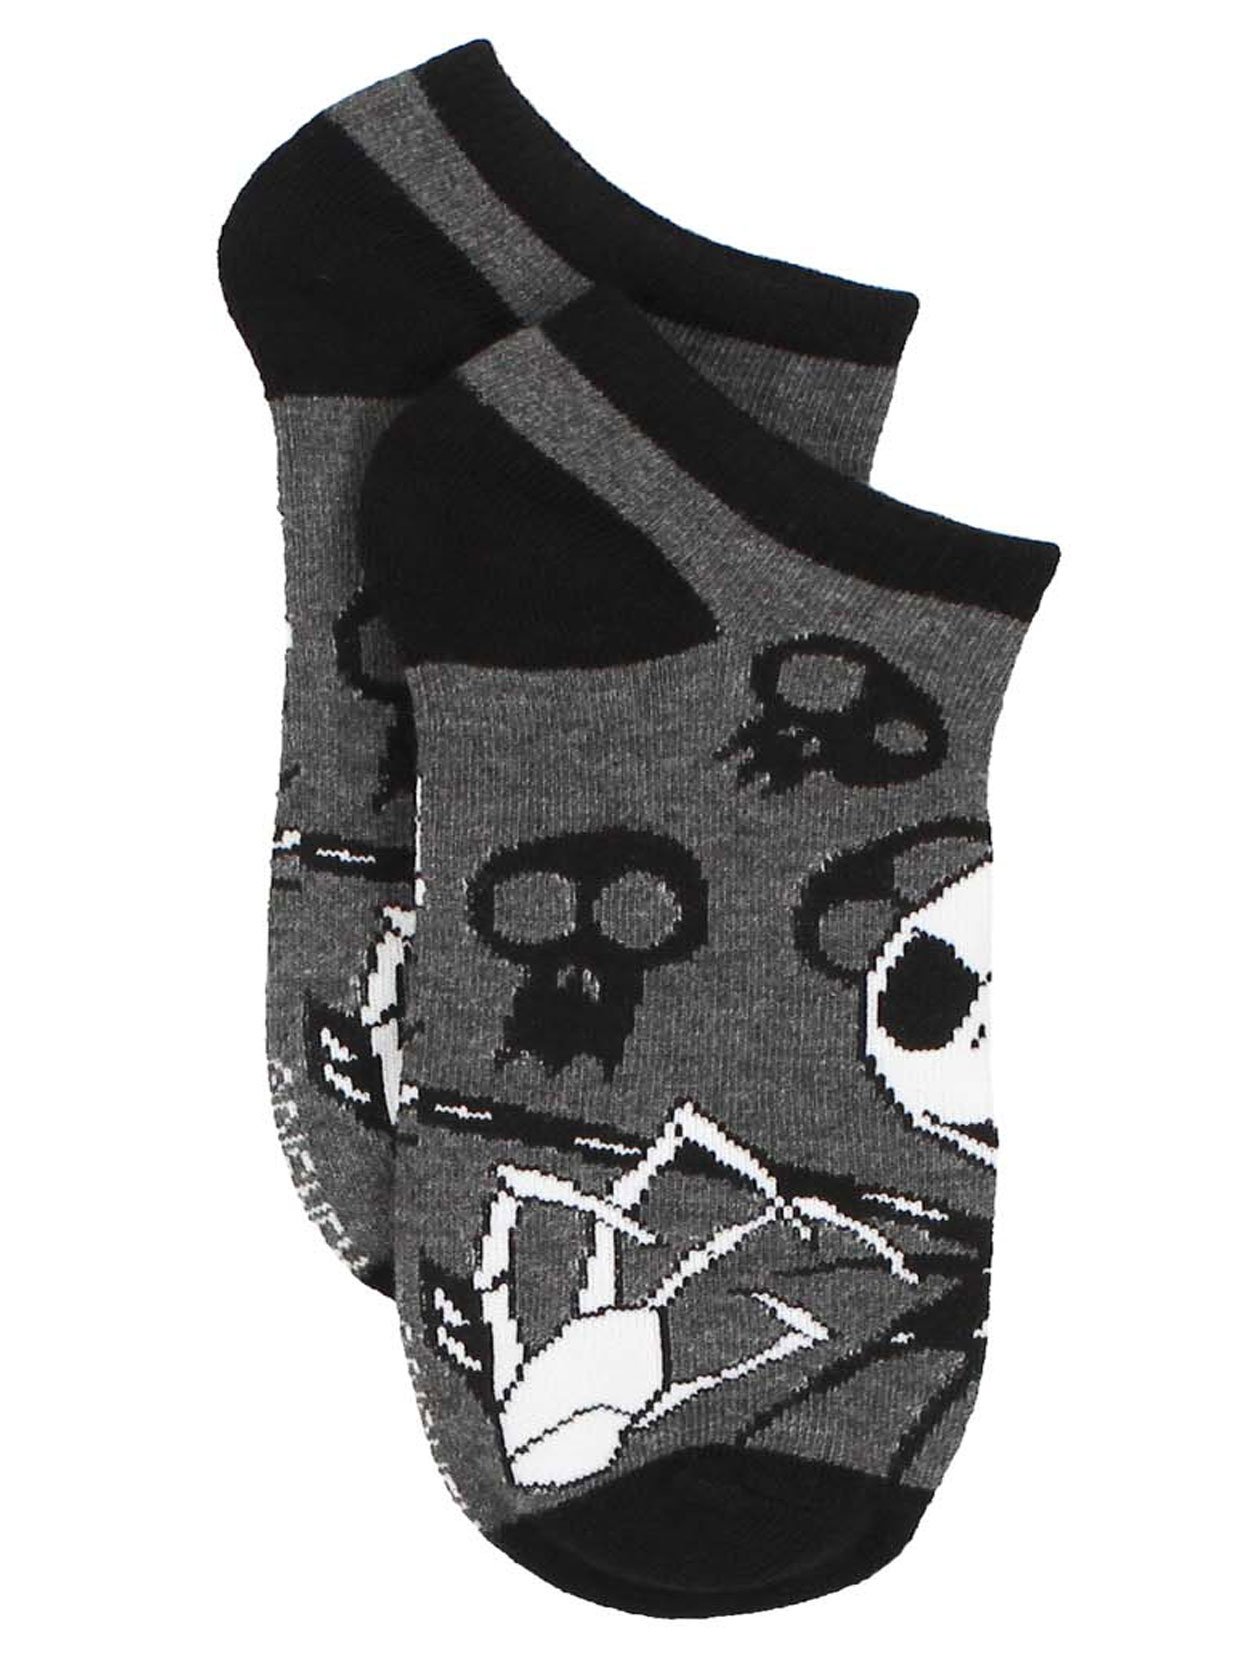 The Nightmare Before Christmas Womens 6 Pack No Show Socks NB047XNS - image 4 of 7